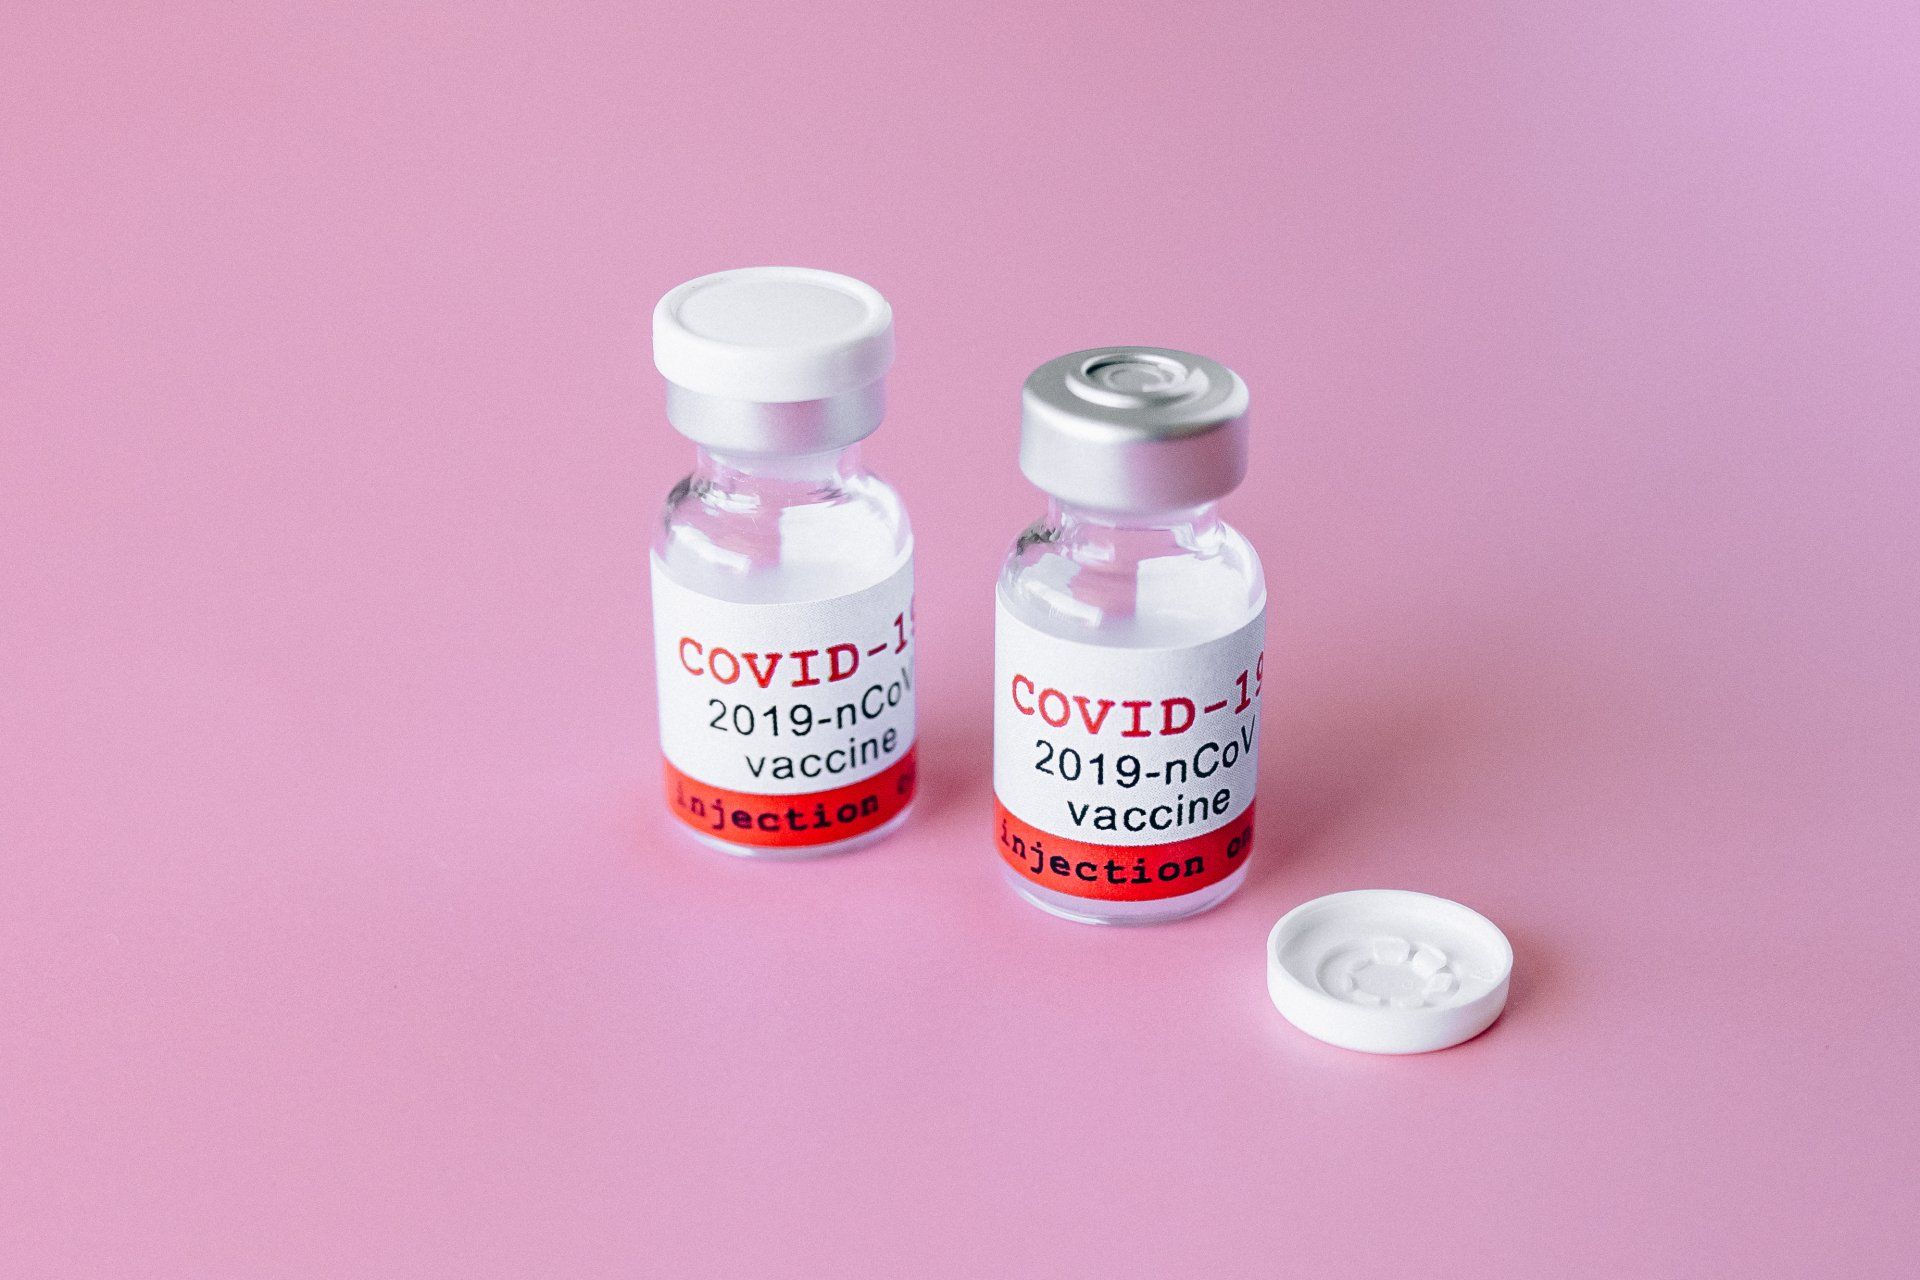 Two bottles of covid-19 vaccine on a pink background.